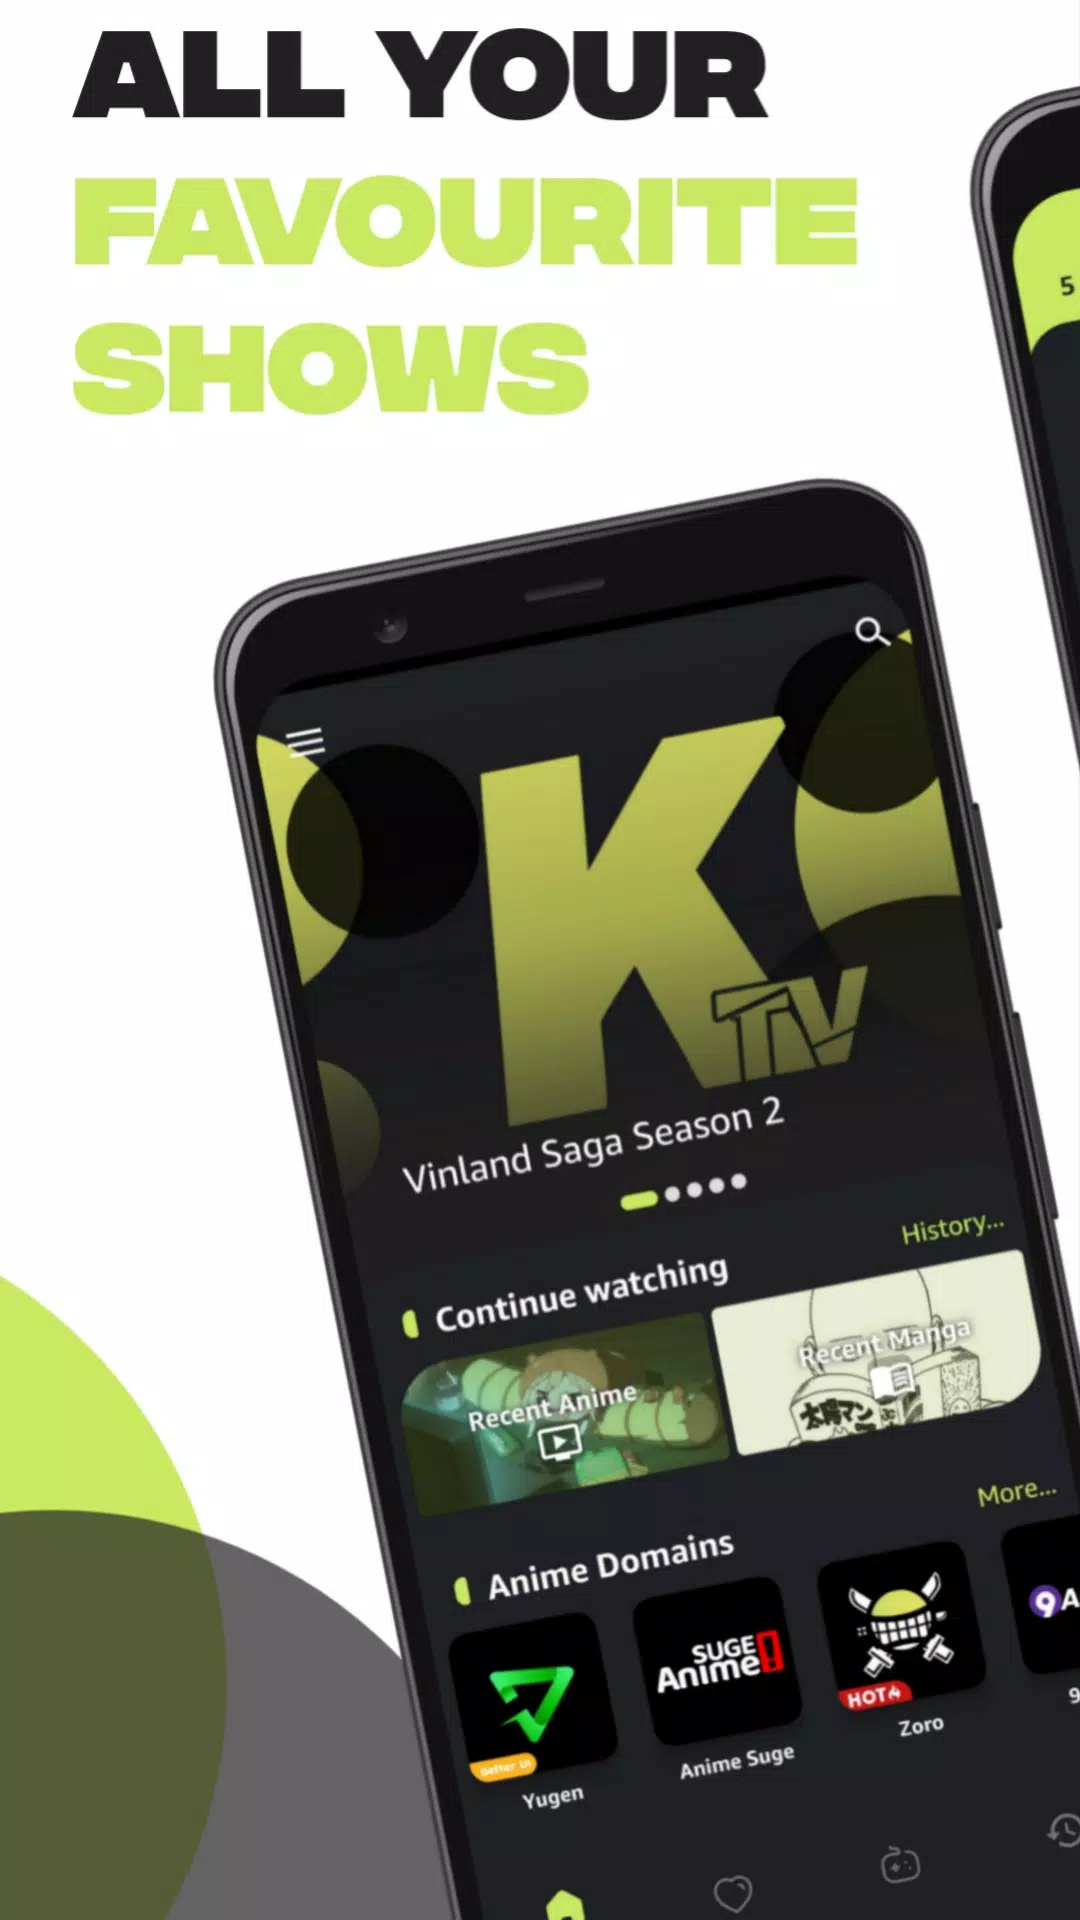 KissAnime - for Anime Lovers#5 APK for Android Download